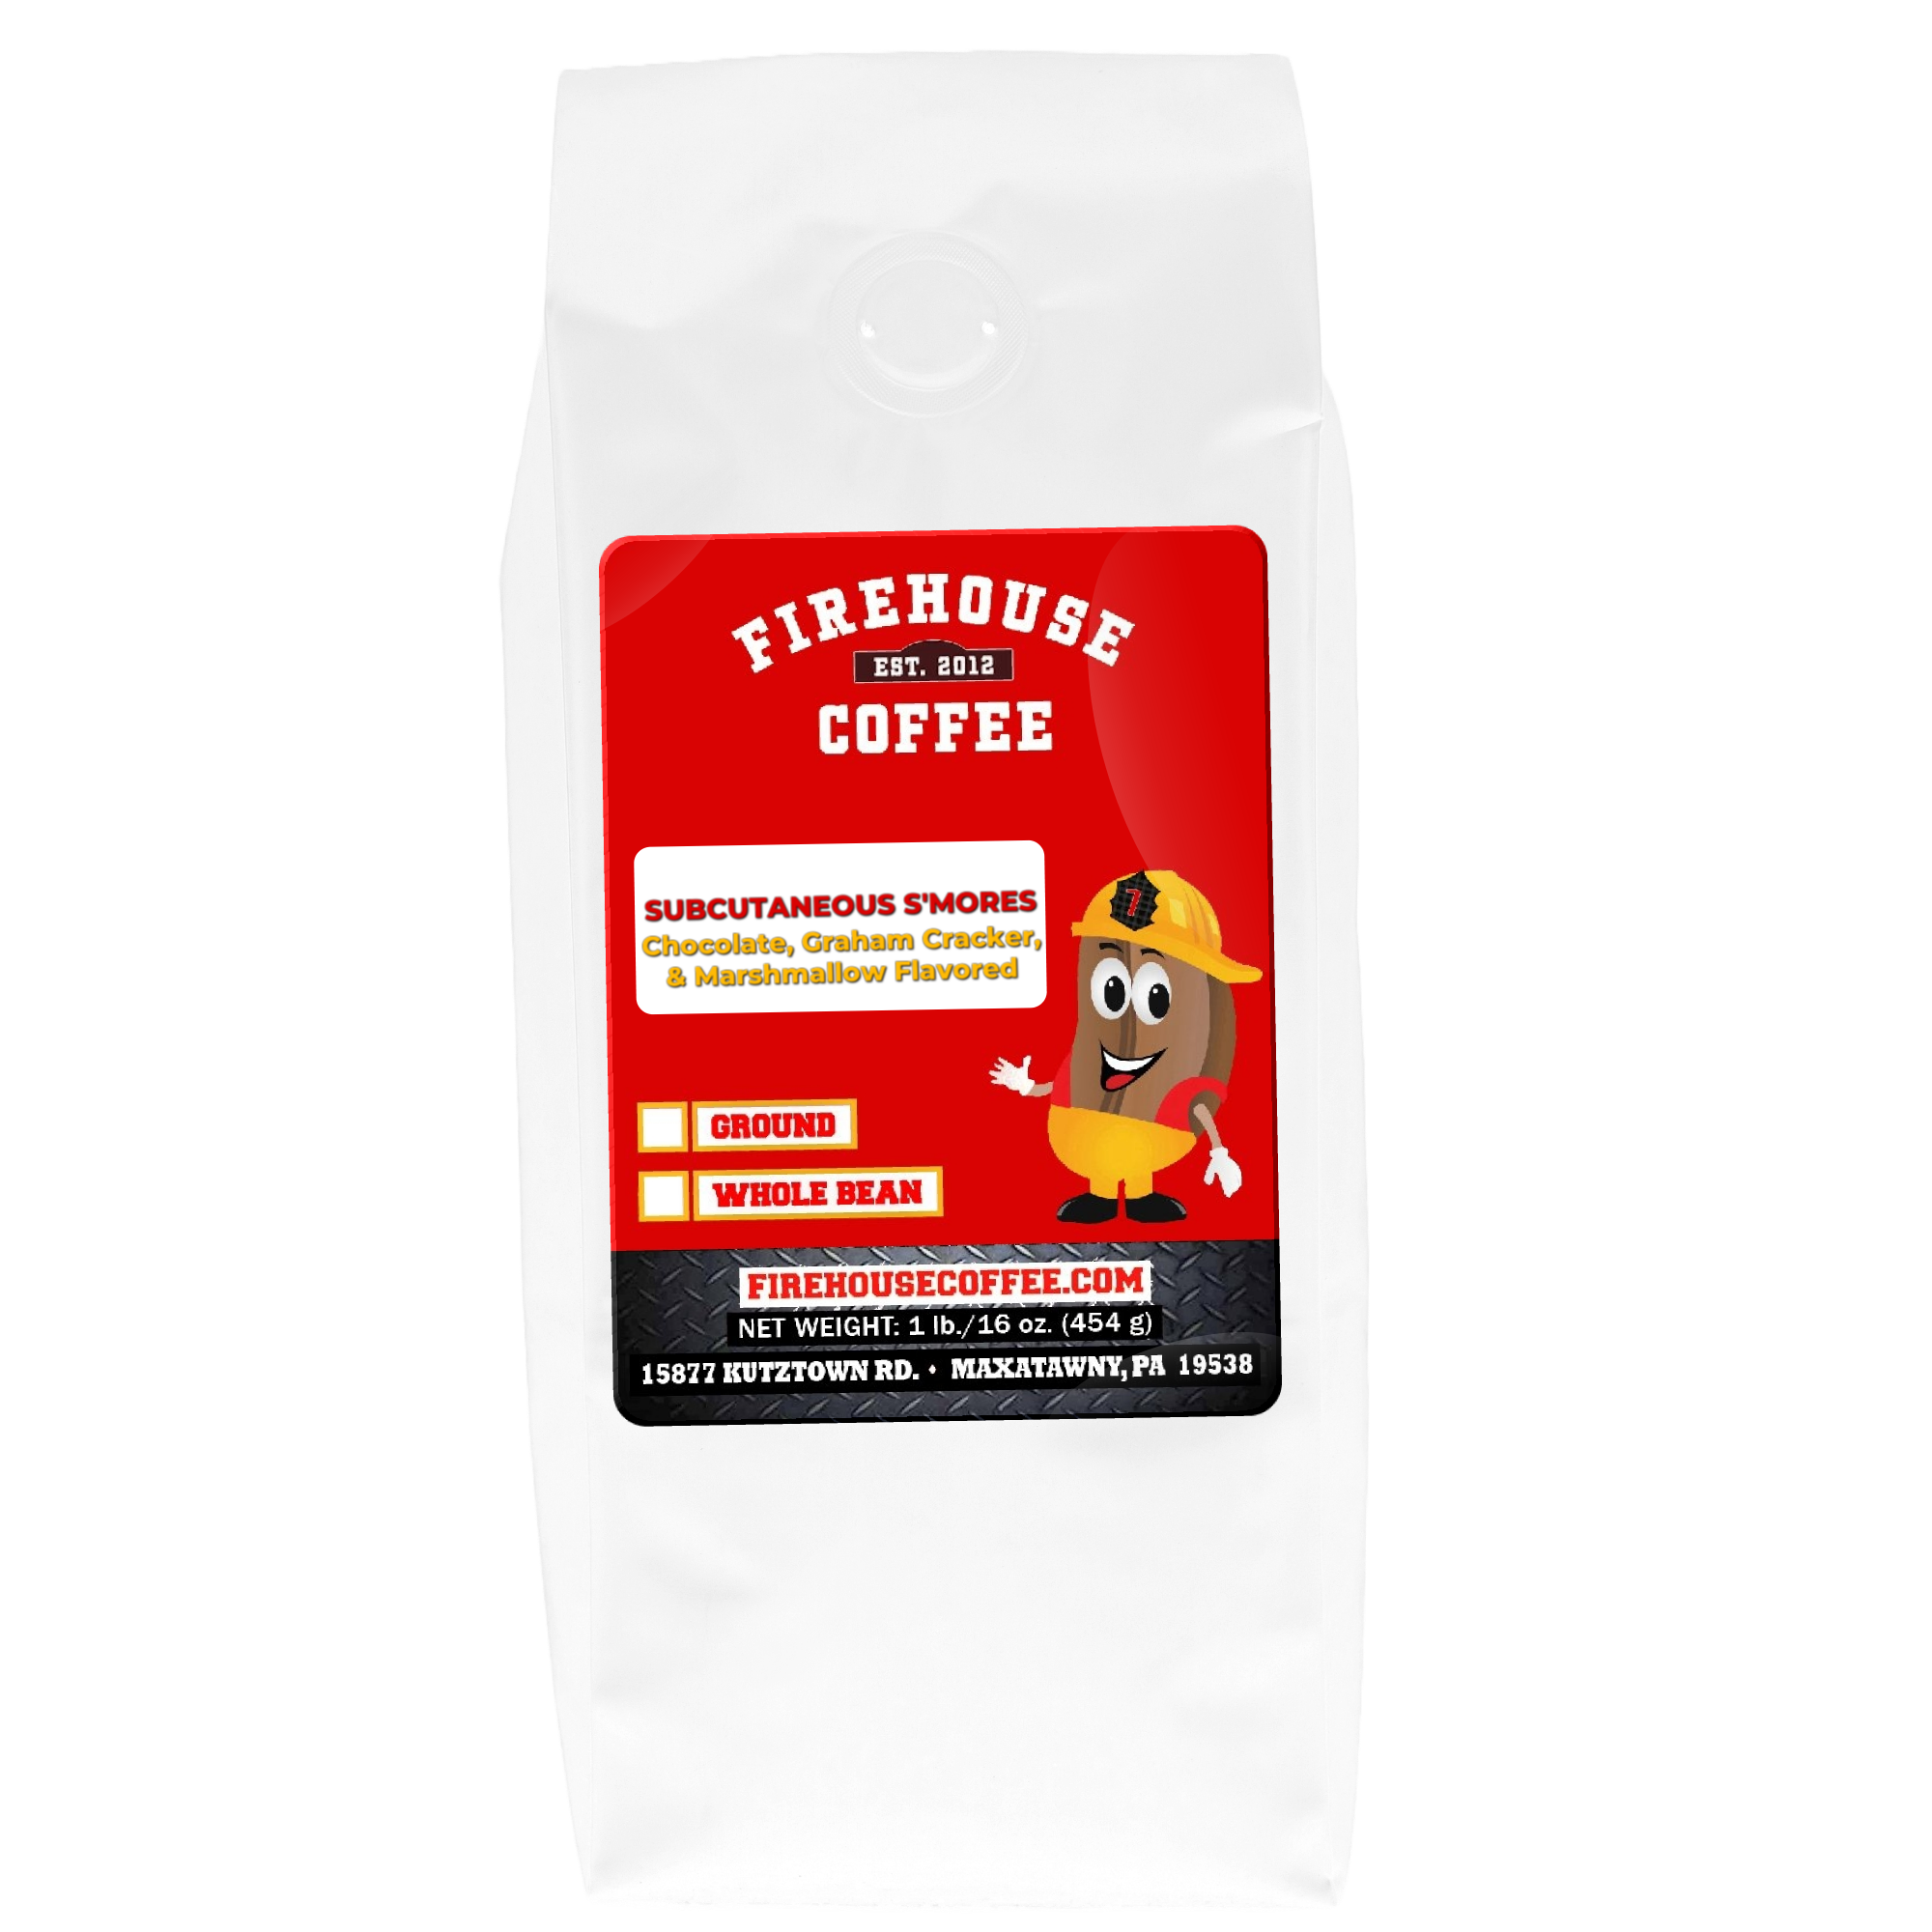 16 oz bag of S'mores Marshmallow Coffee